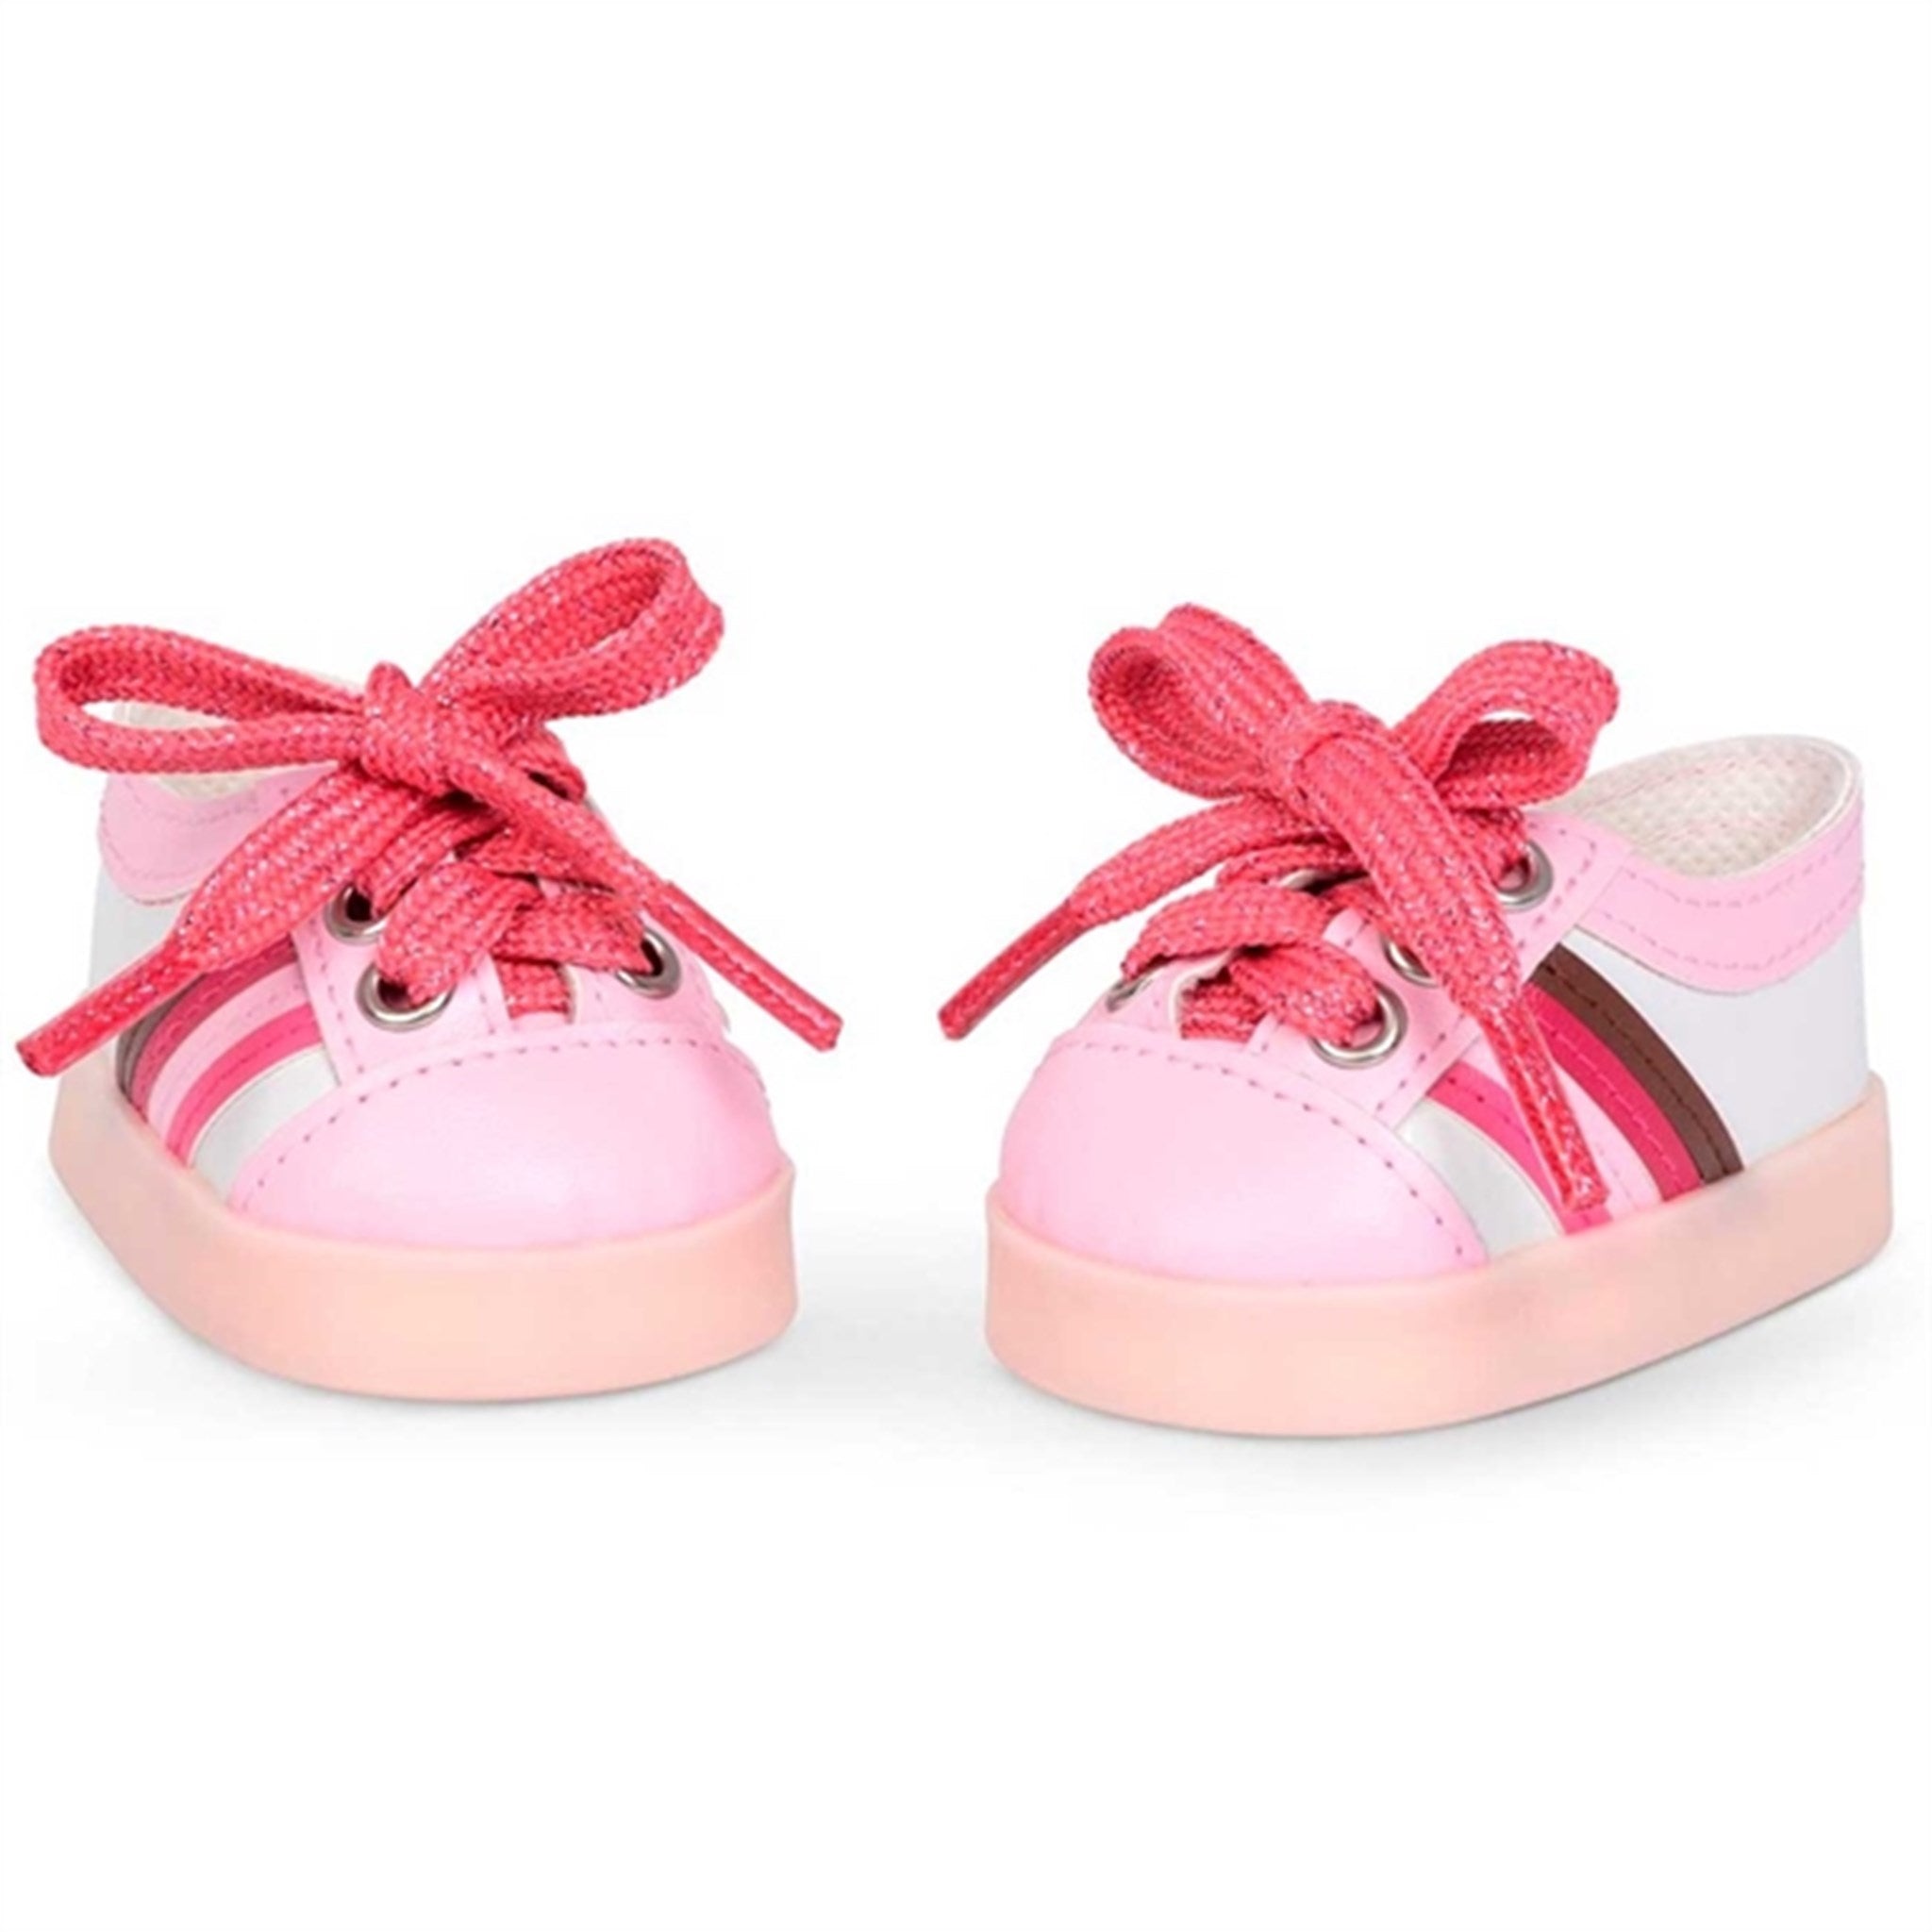 Our Generation Doll Shoes w. Light Lyserød